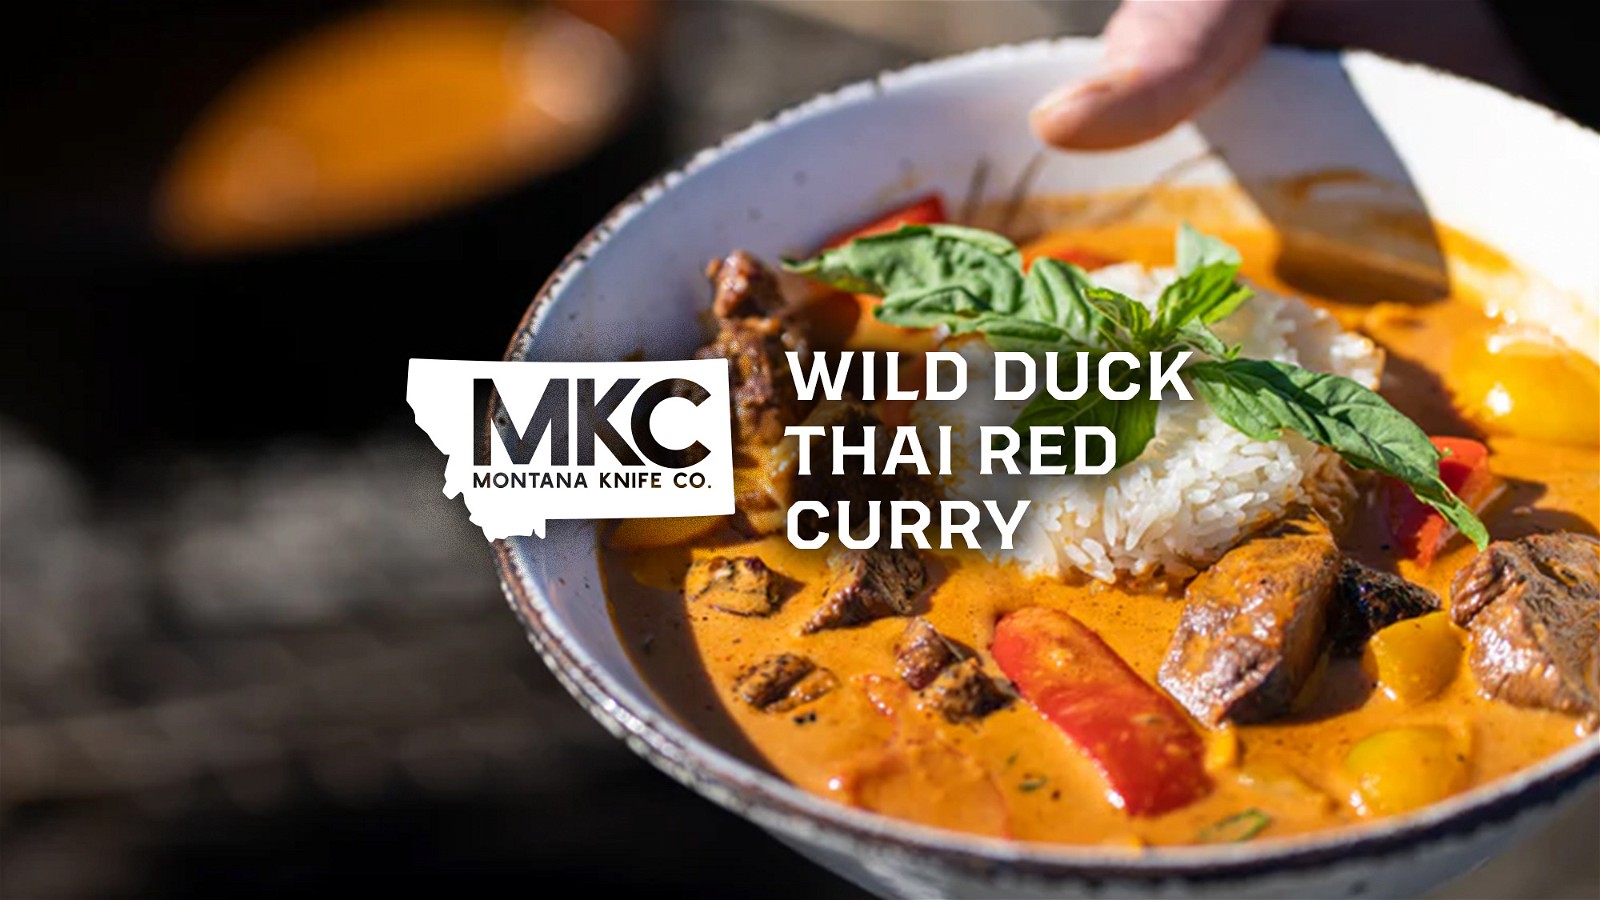 Image of Wild Duck Thai Red Curry